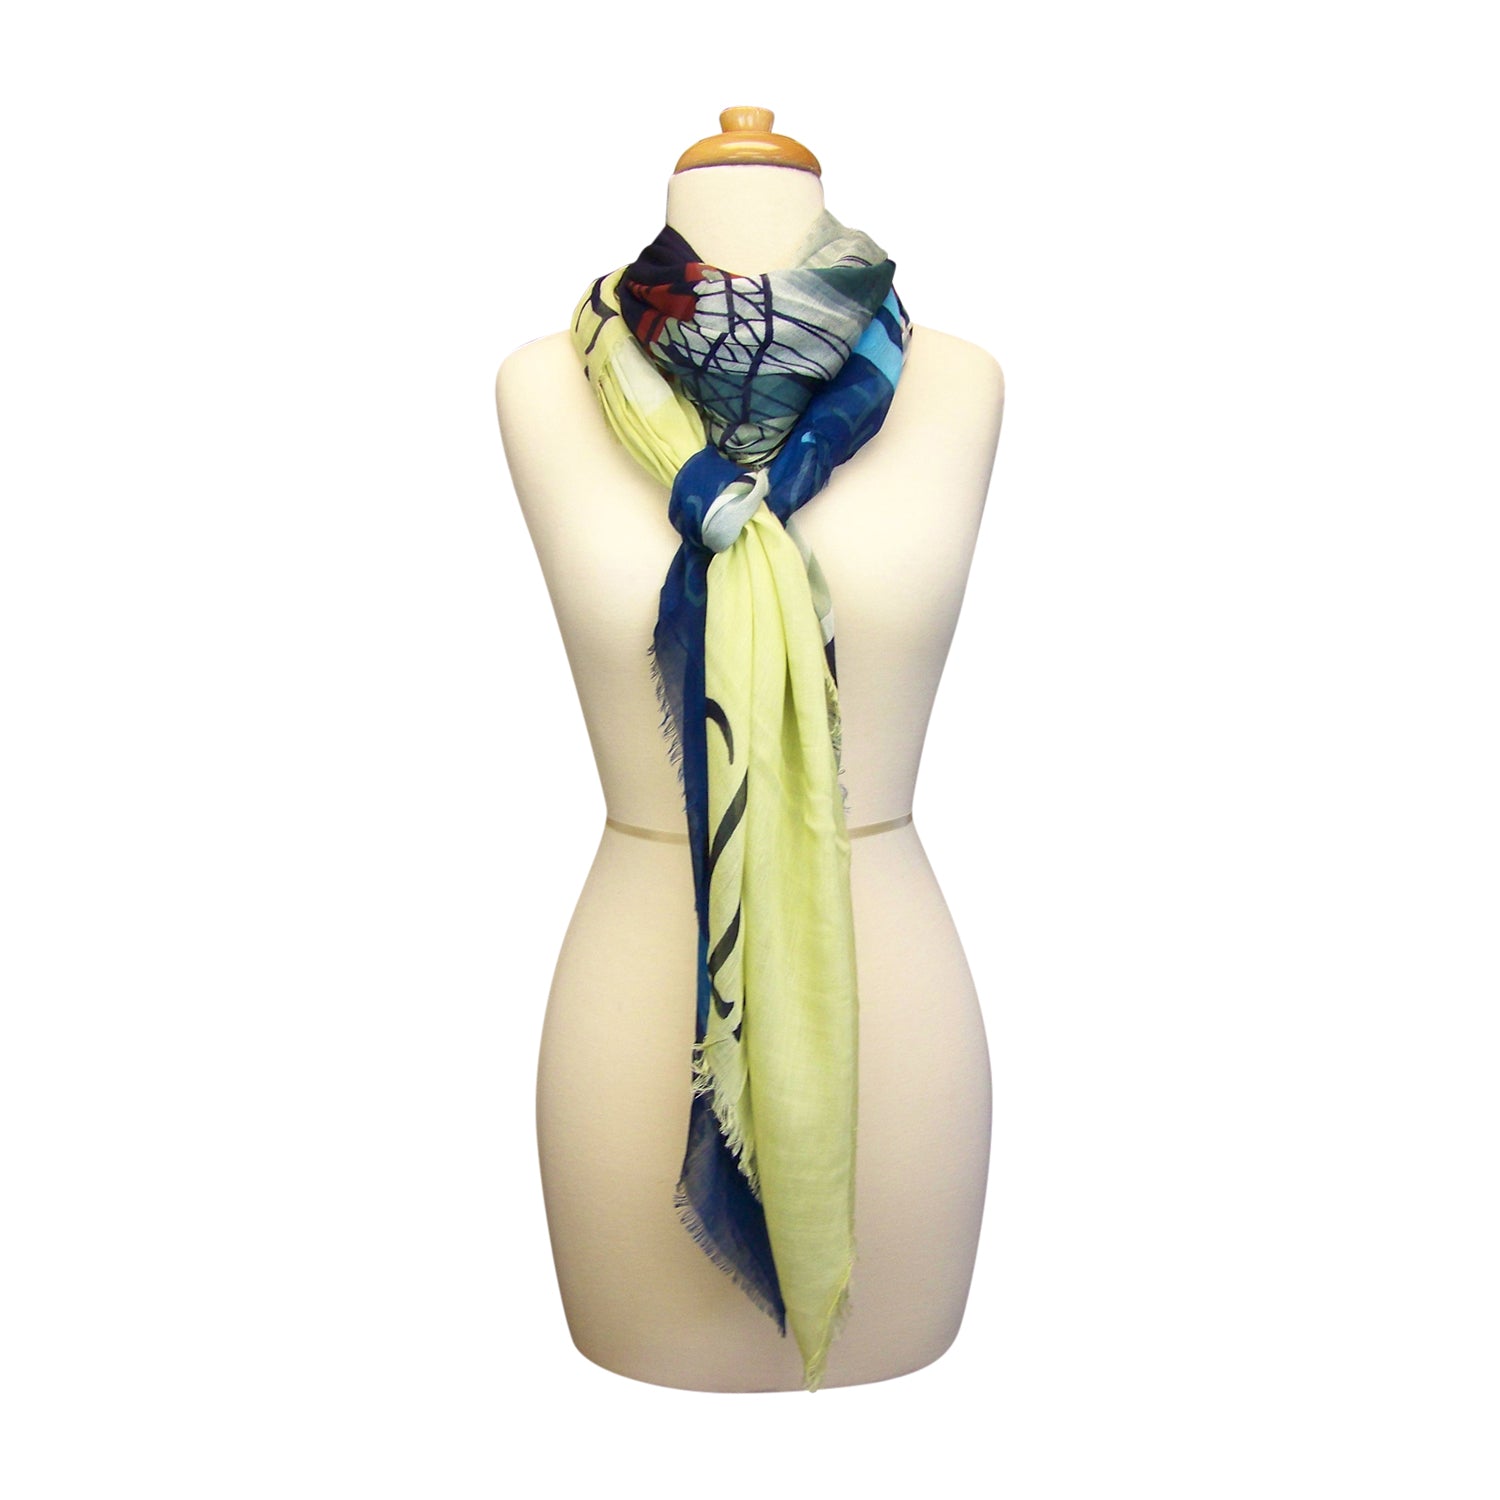 Mannequin Wearing Blue Pacific Brooklyn Bridge New York Cashmere and Silk Scarf in Blue Yellow